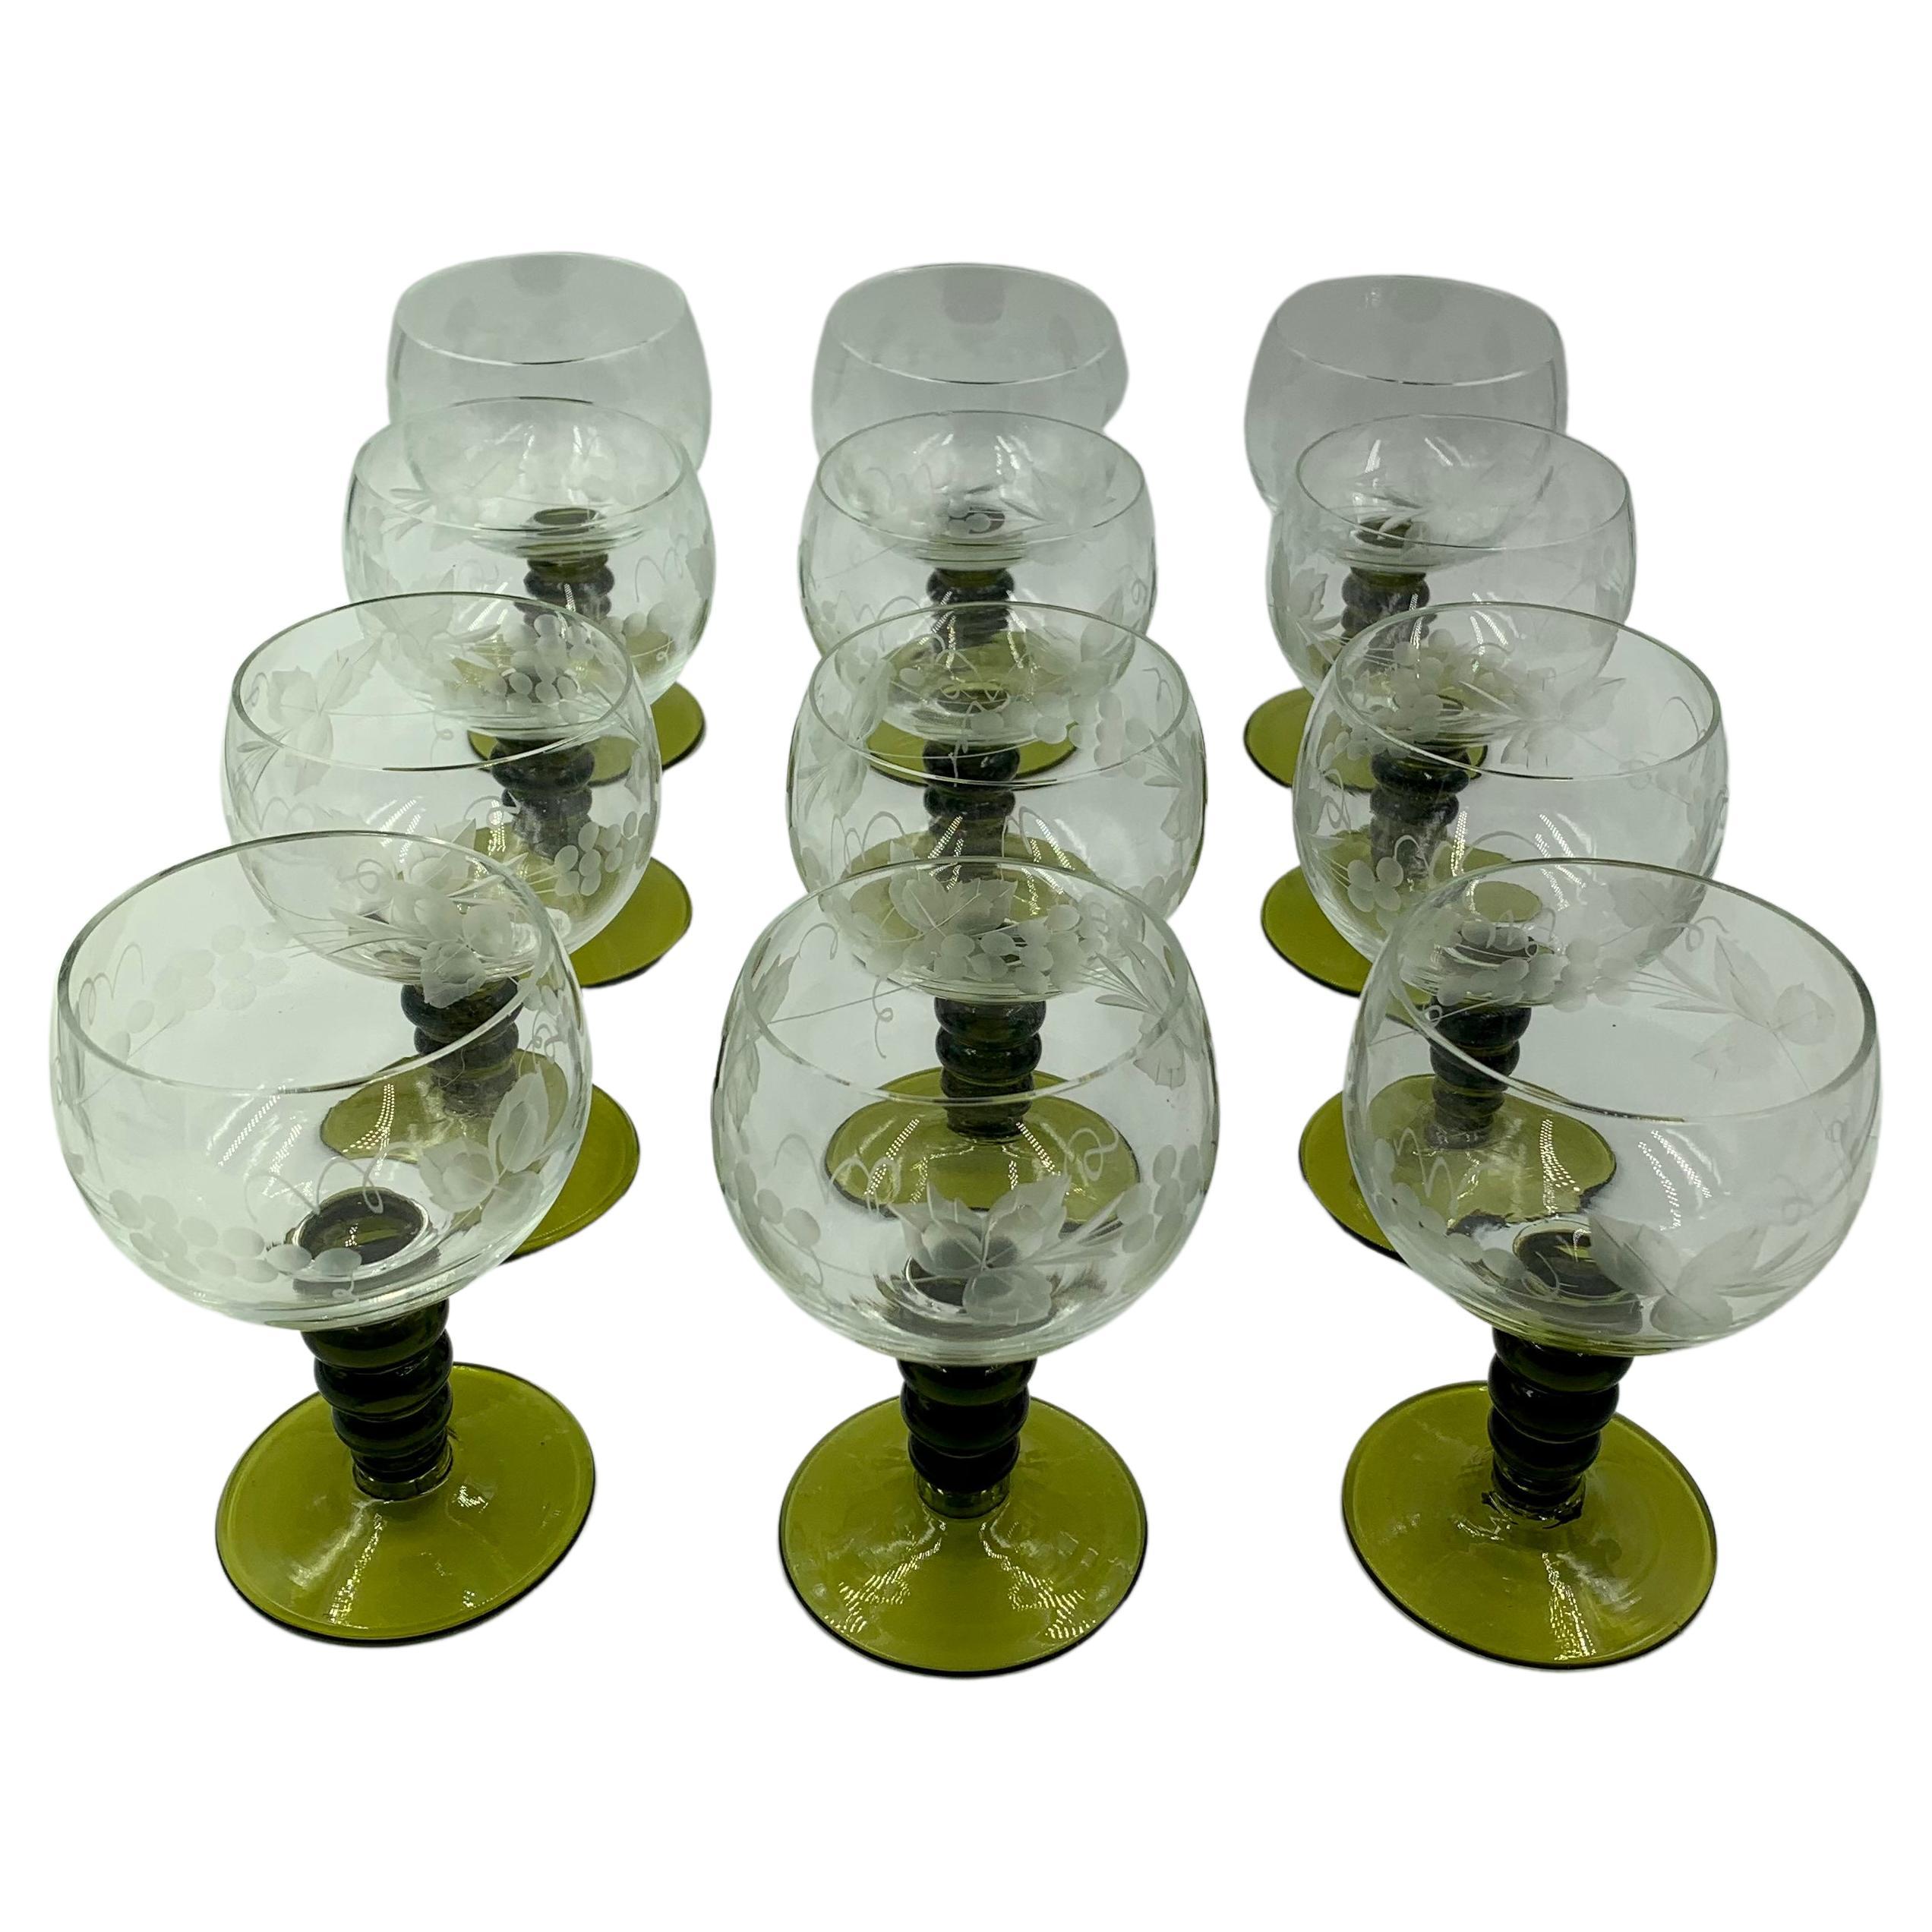 5” high circa 1970’s green water glasses with stem and foot 